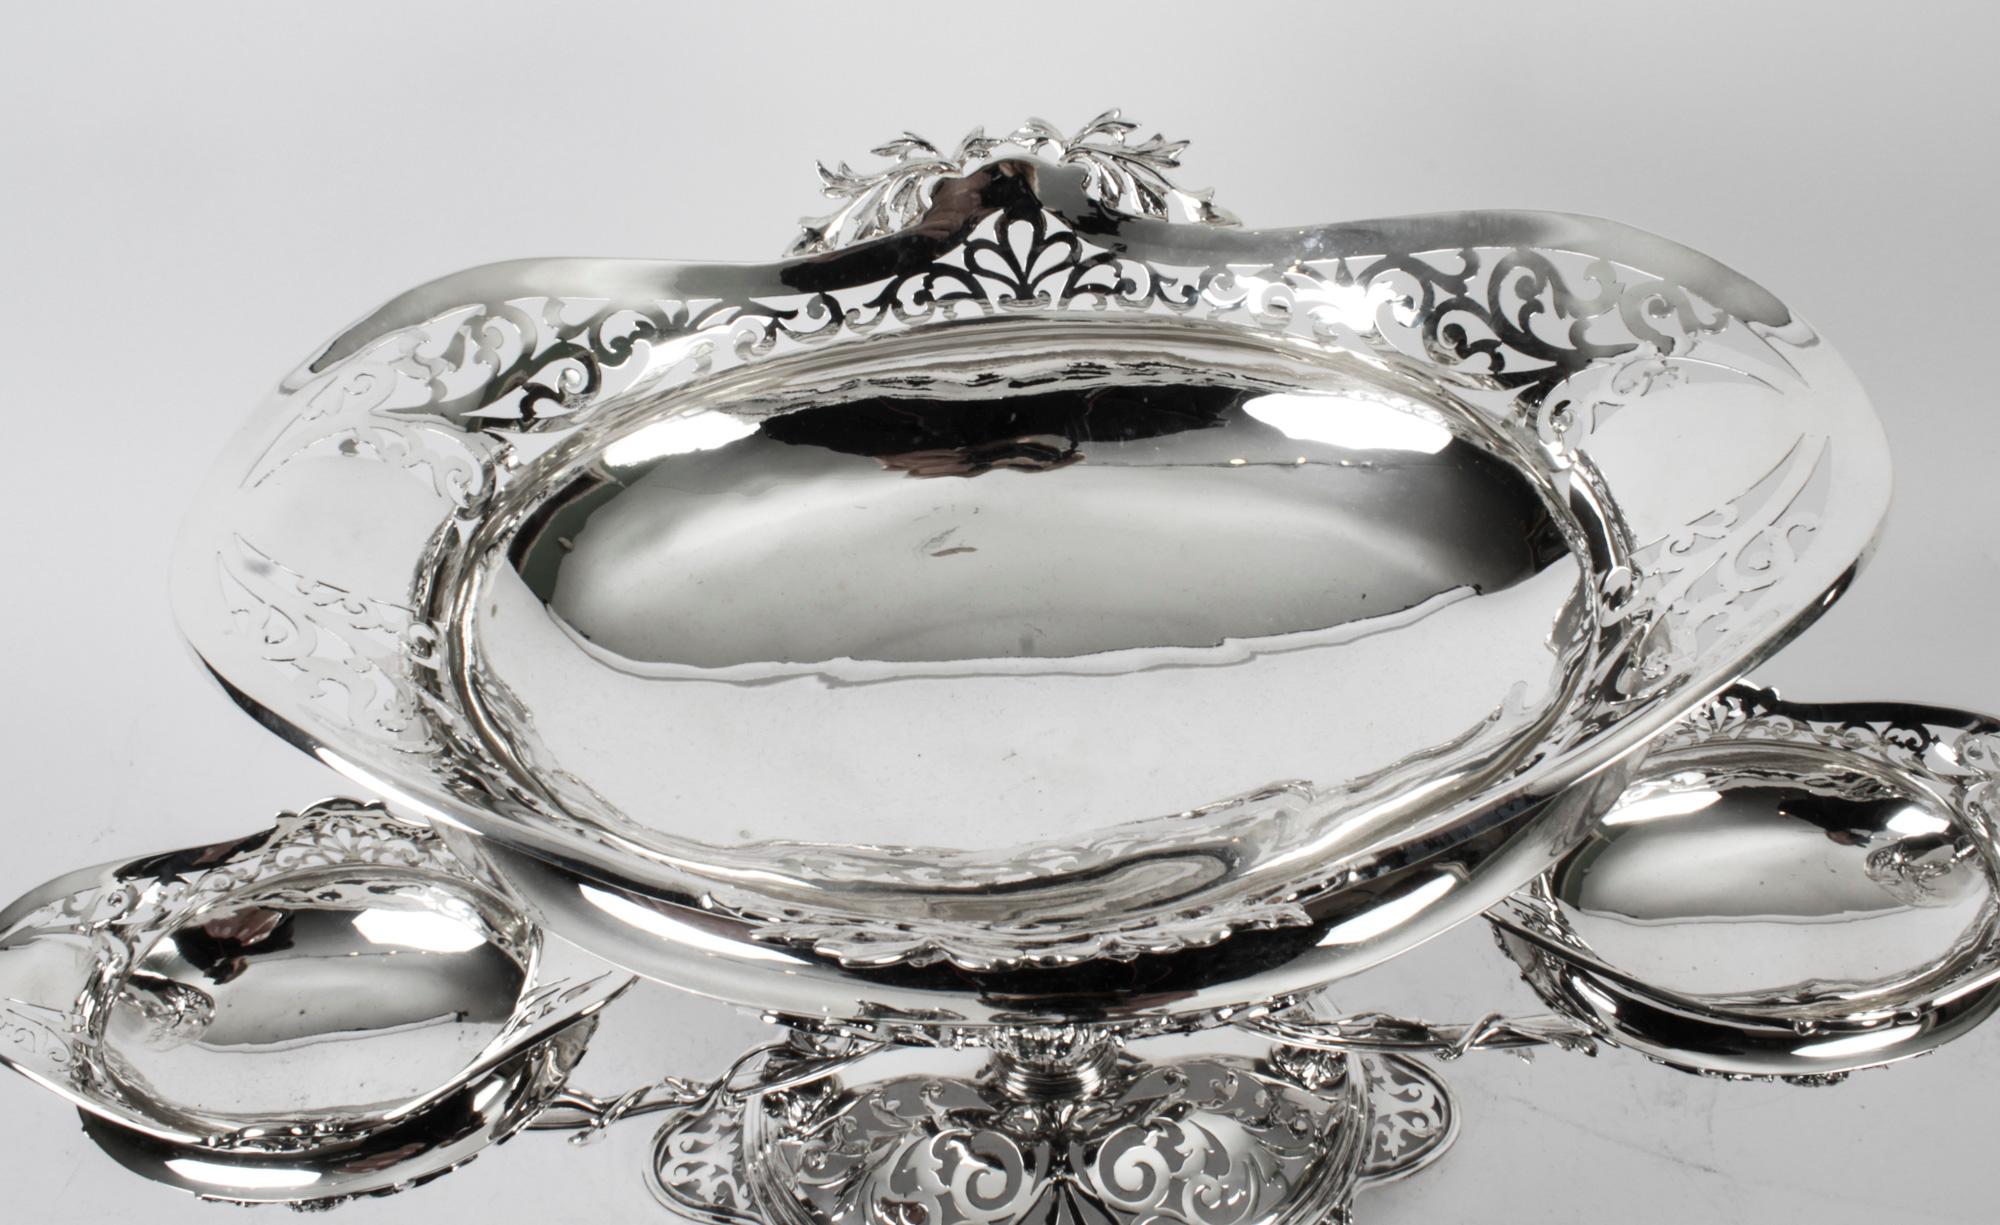 Antique Victorian Silverplate Centrepiece Mappin & Webb 1880 19th Century For Sale 2